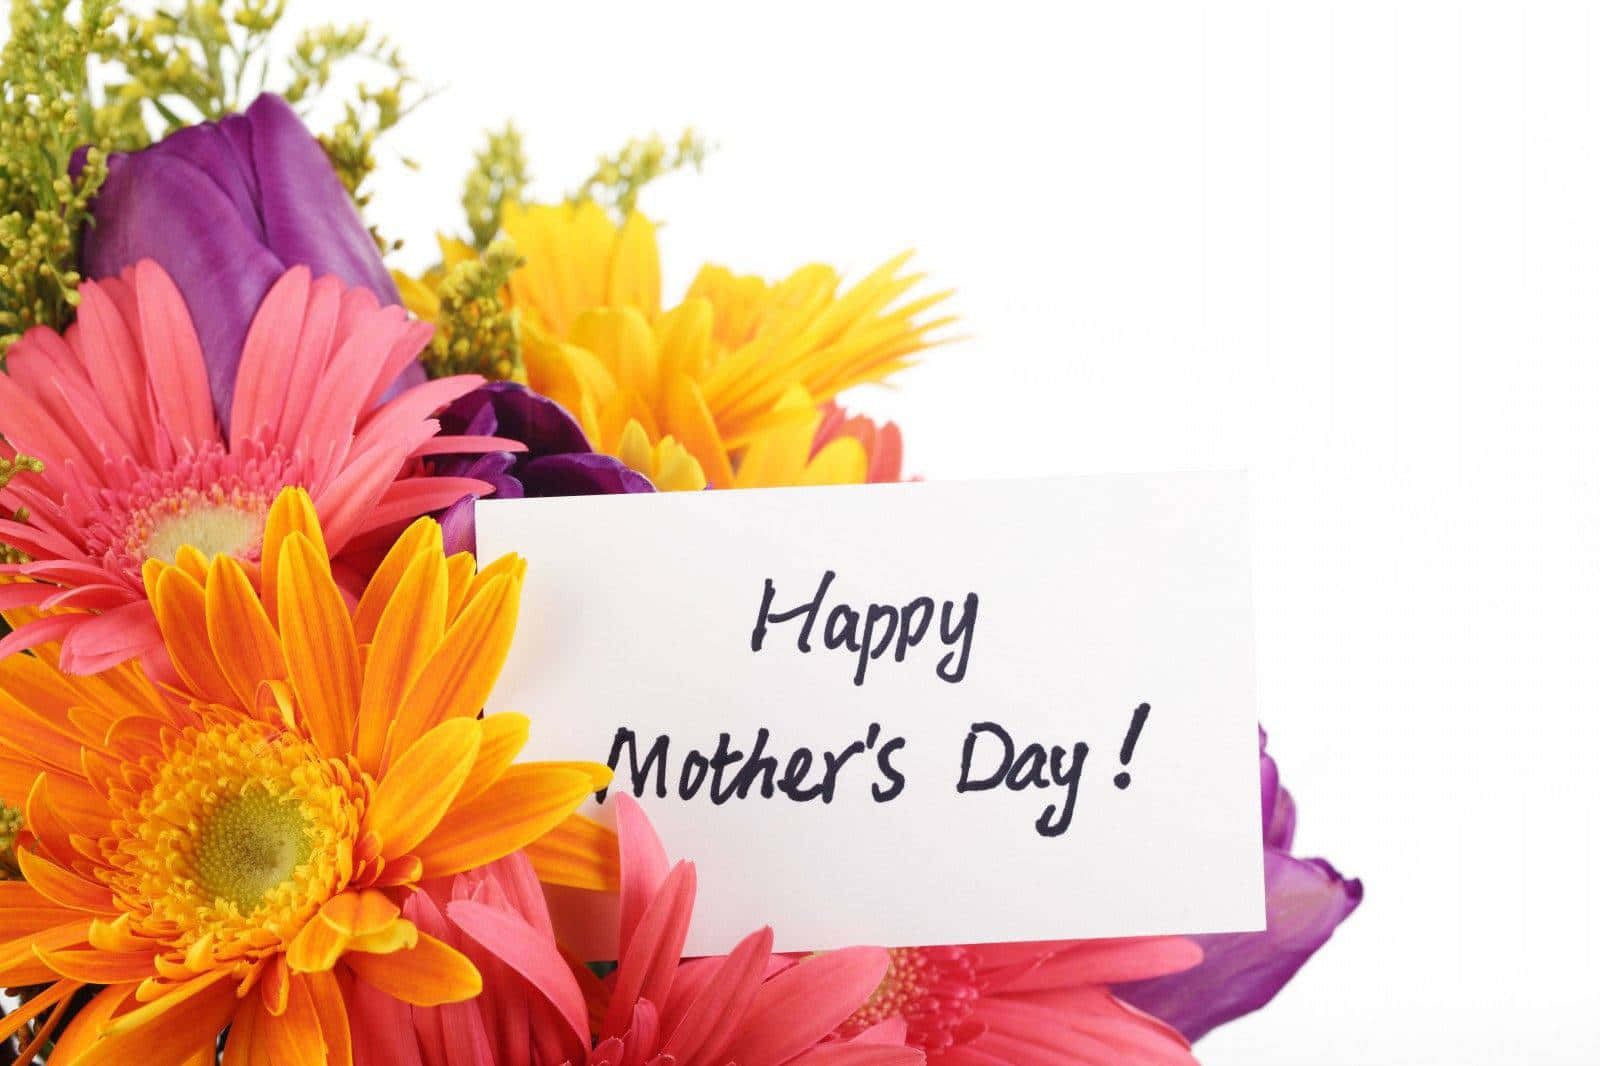 Celebrate the special bond between mothers and their children this Mothers Day!